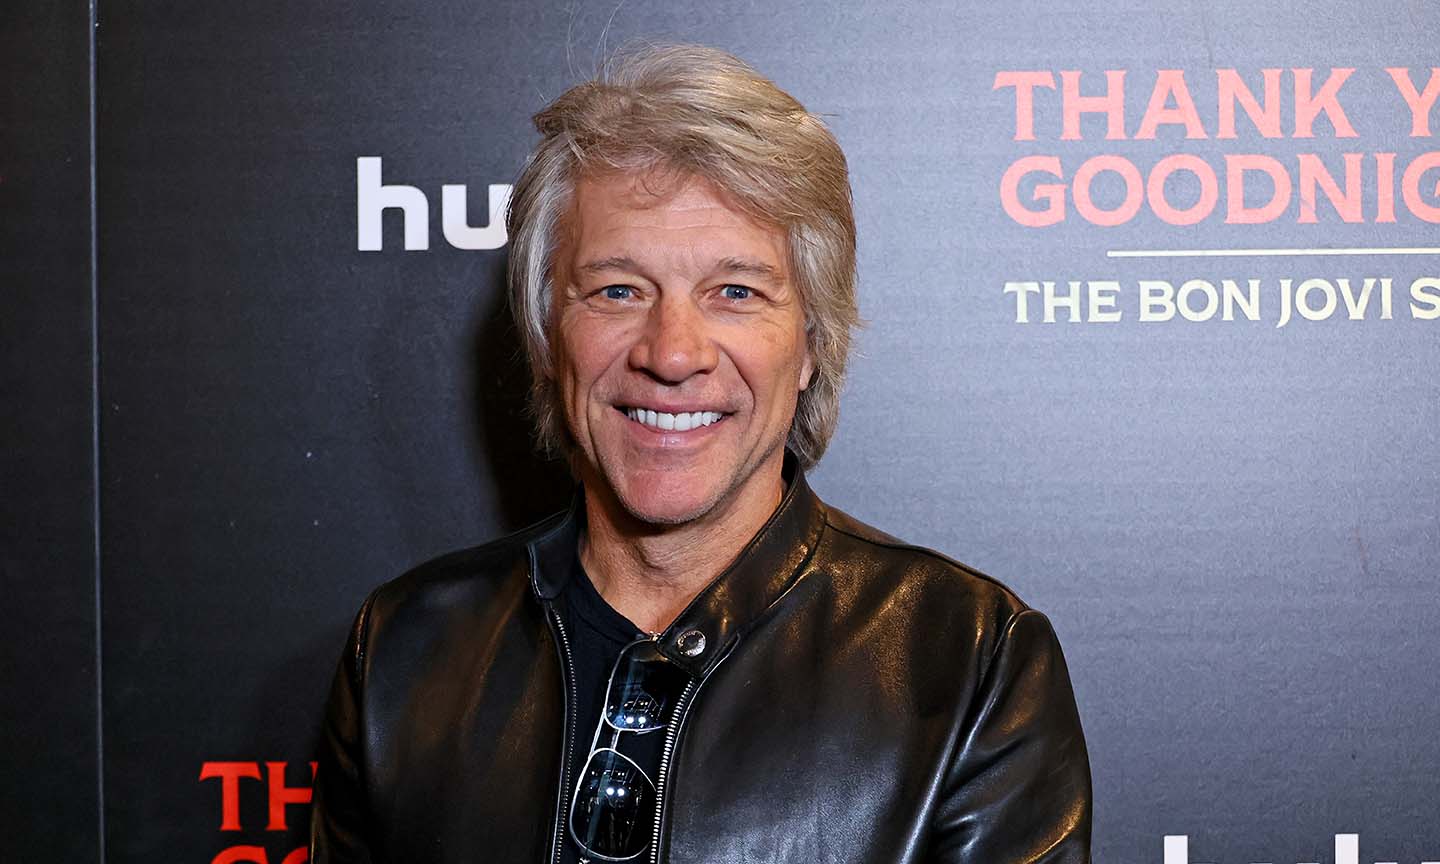 Five Things We Learned In ‘Thank You, Goodnight: The Bon Jovi Story’